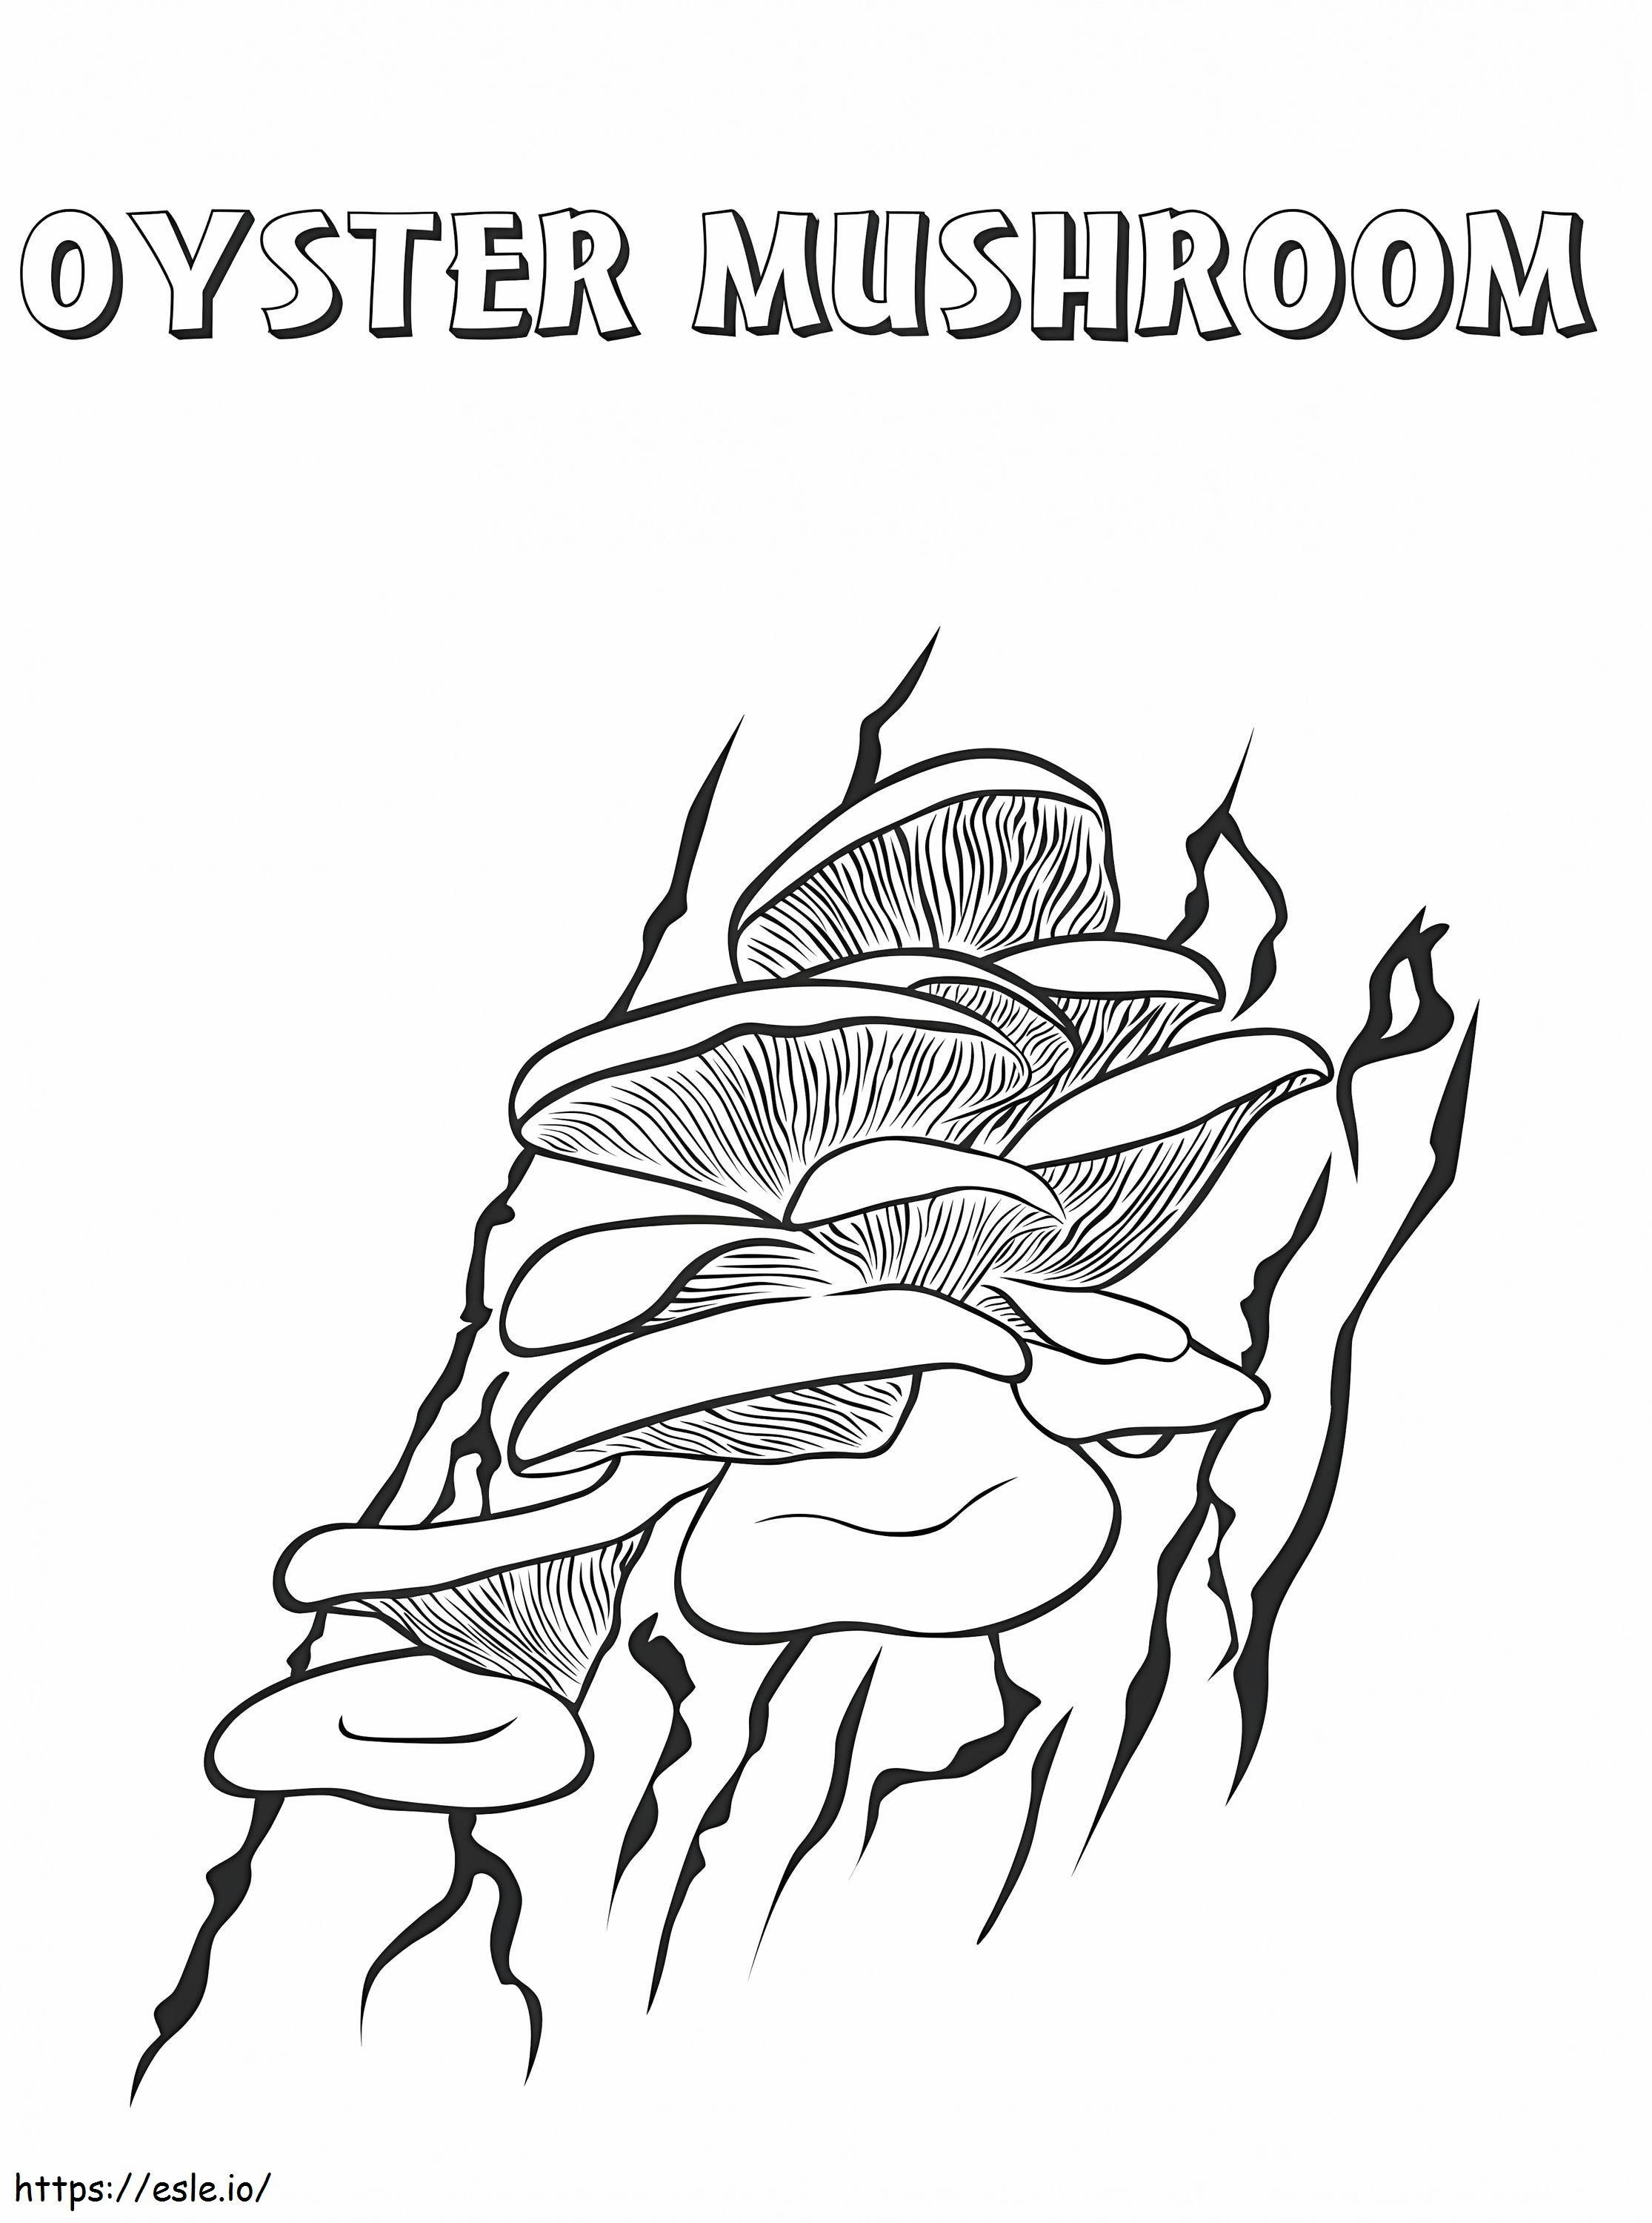 Oyster Mushrooms coloring page